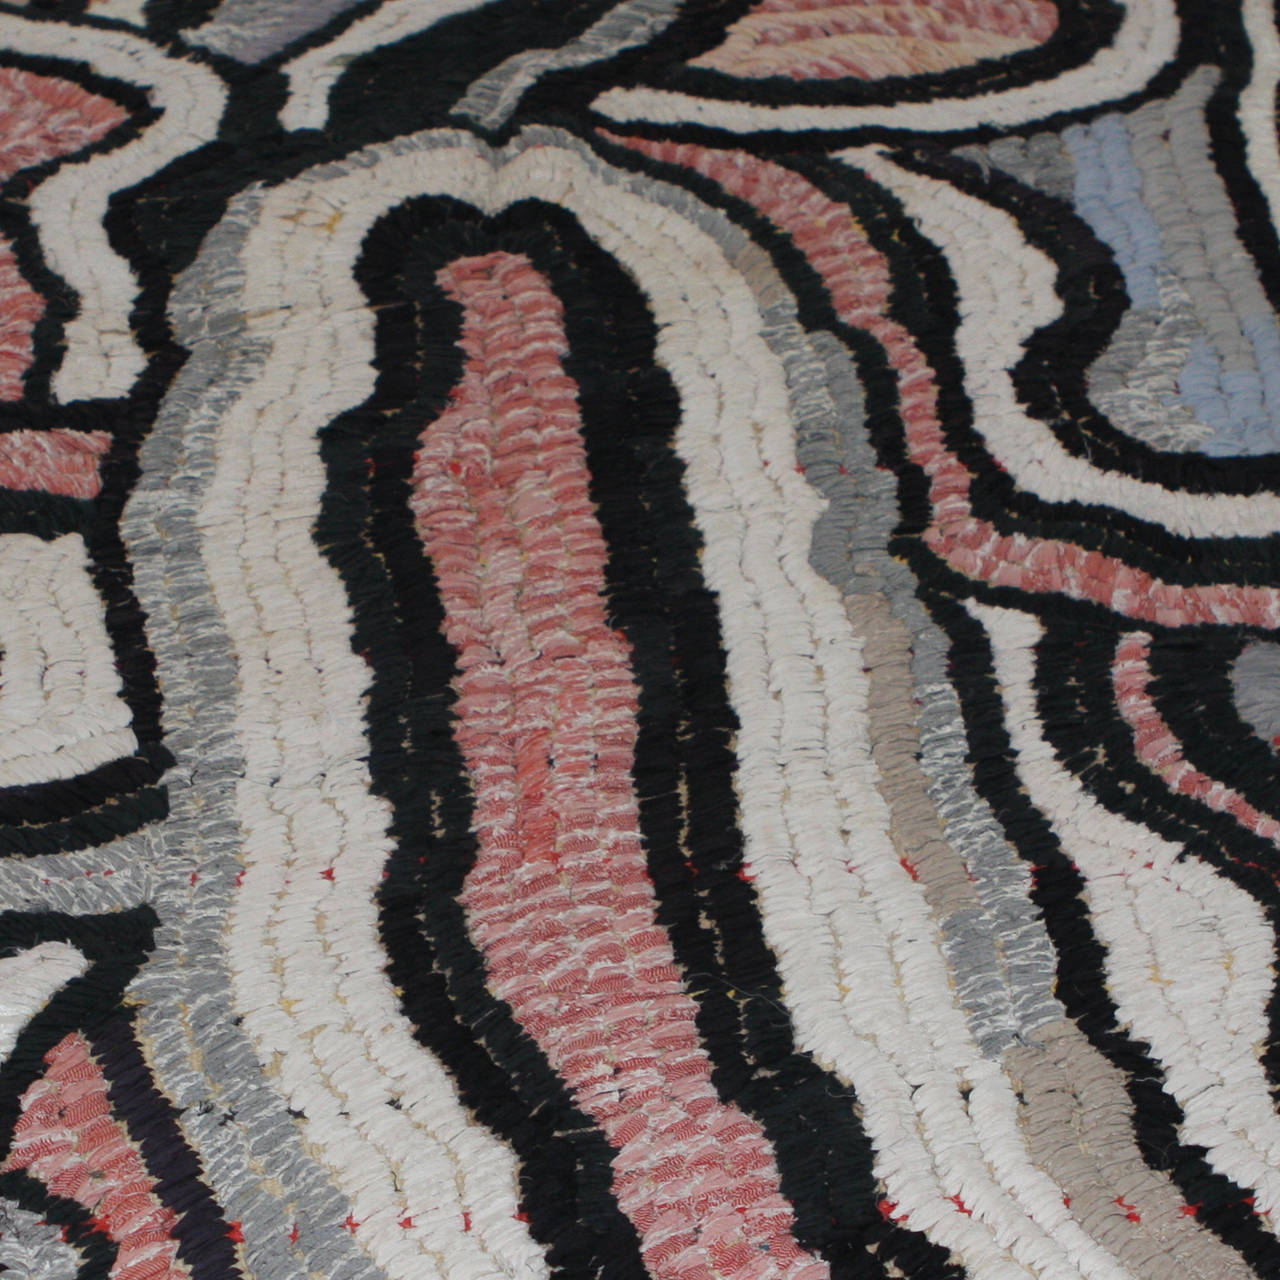 Contemporary Moroccan hand-woven rug utilizing cotton remnants in a loop technique. Highly unique and original organic pattern, very painterly. Dominant colors are grey, cream, pale pink and black.